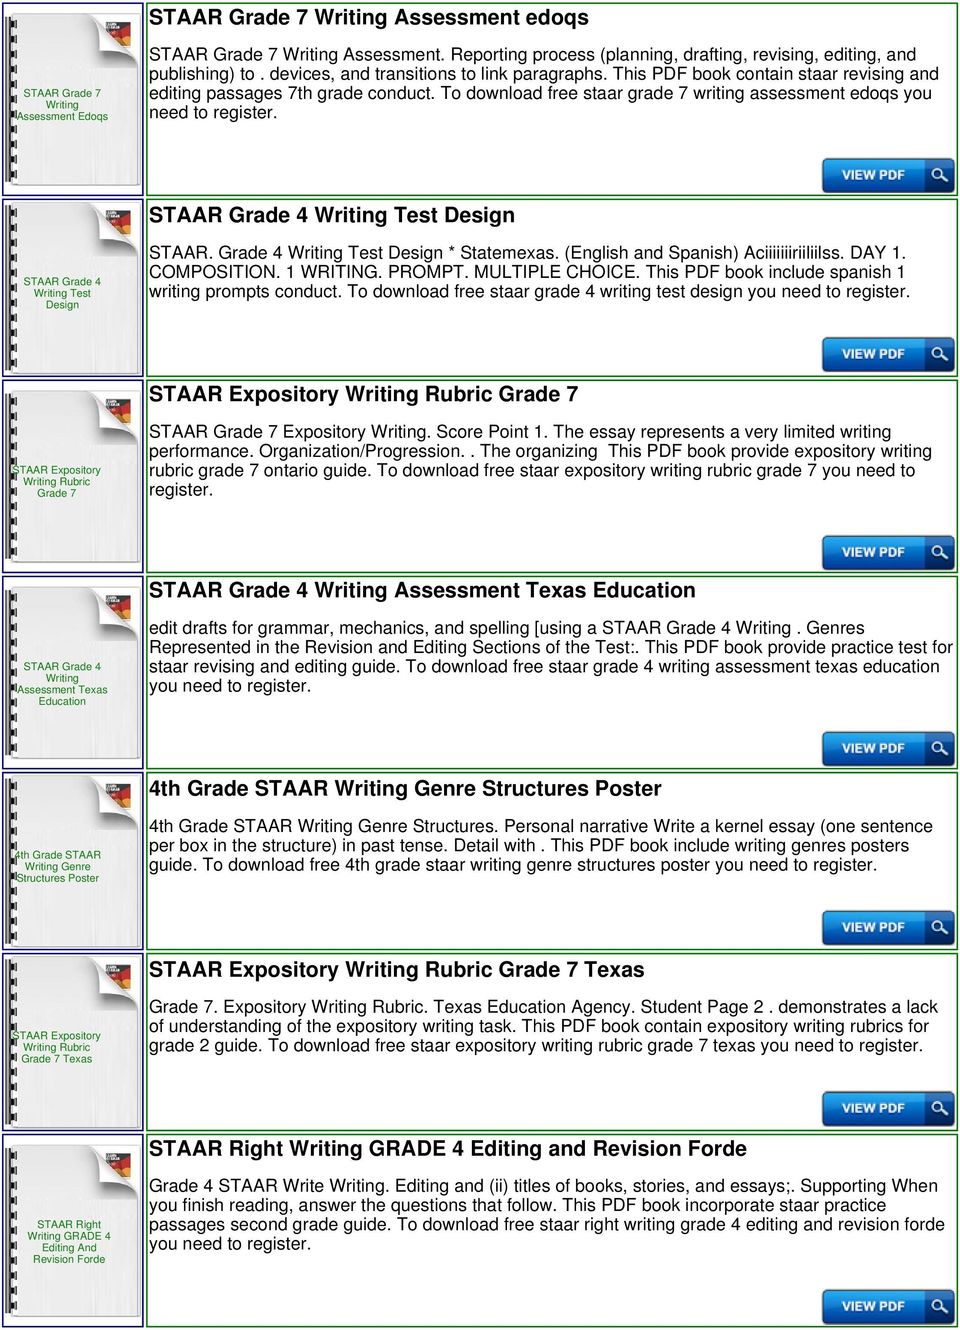 To download free staar grade 7 writing assessment edoqs you need to Test Design Test Design STAAR. Grade 4 Test Design * Statemexas. (English and Spanish) Aciiiiiiiriiliilss. DAY 1. COMPOSITION.